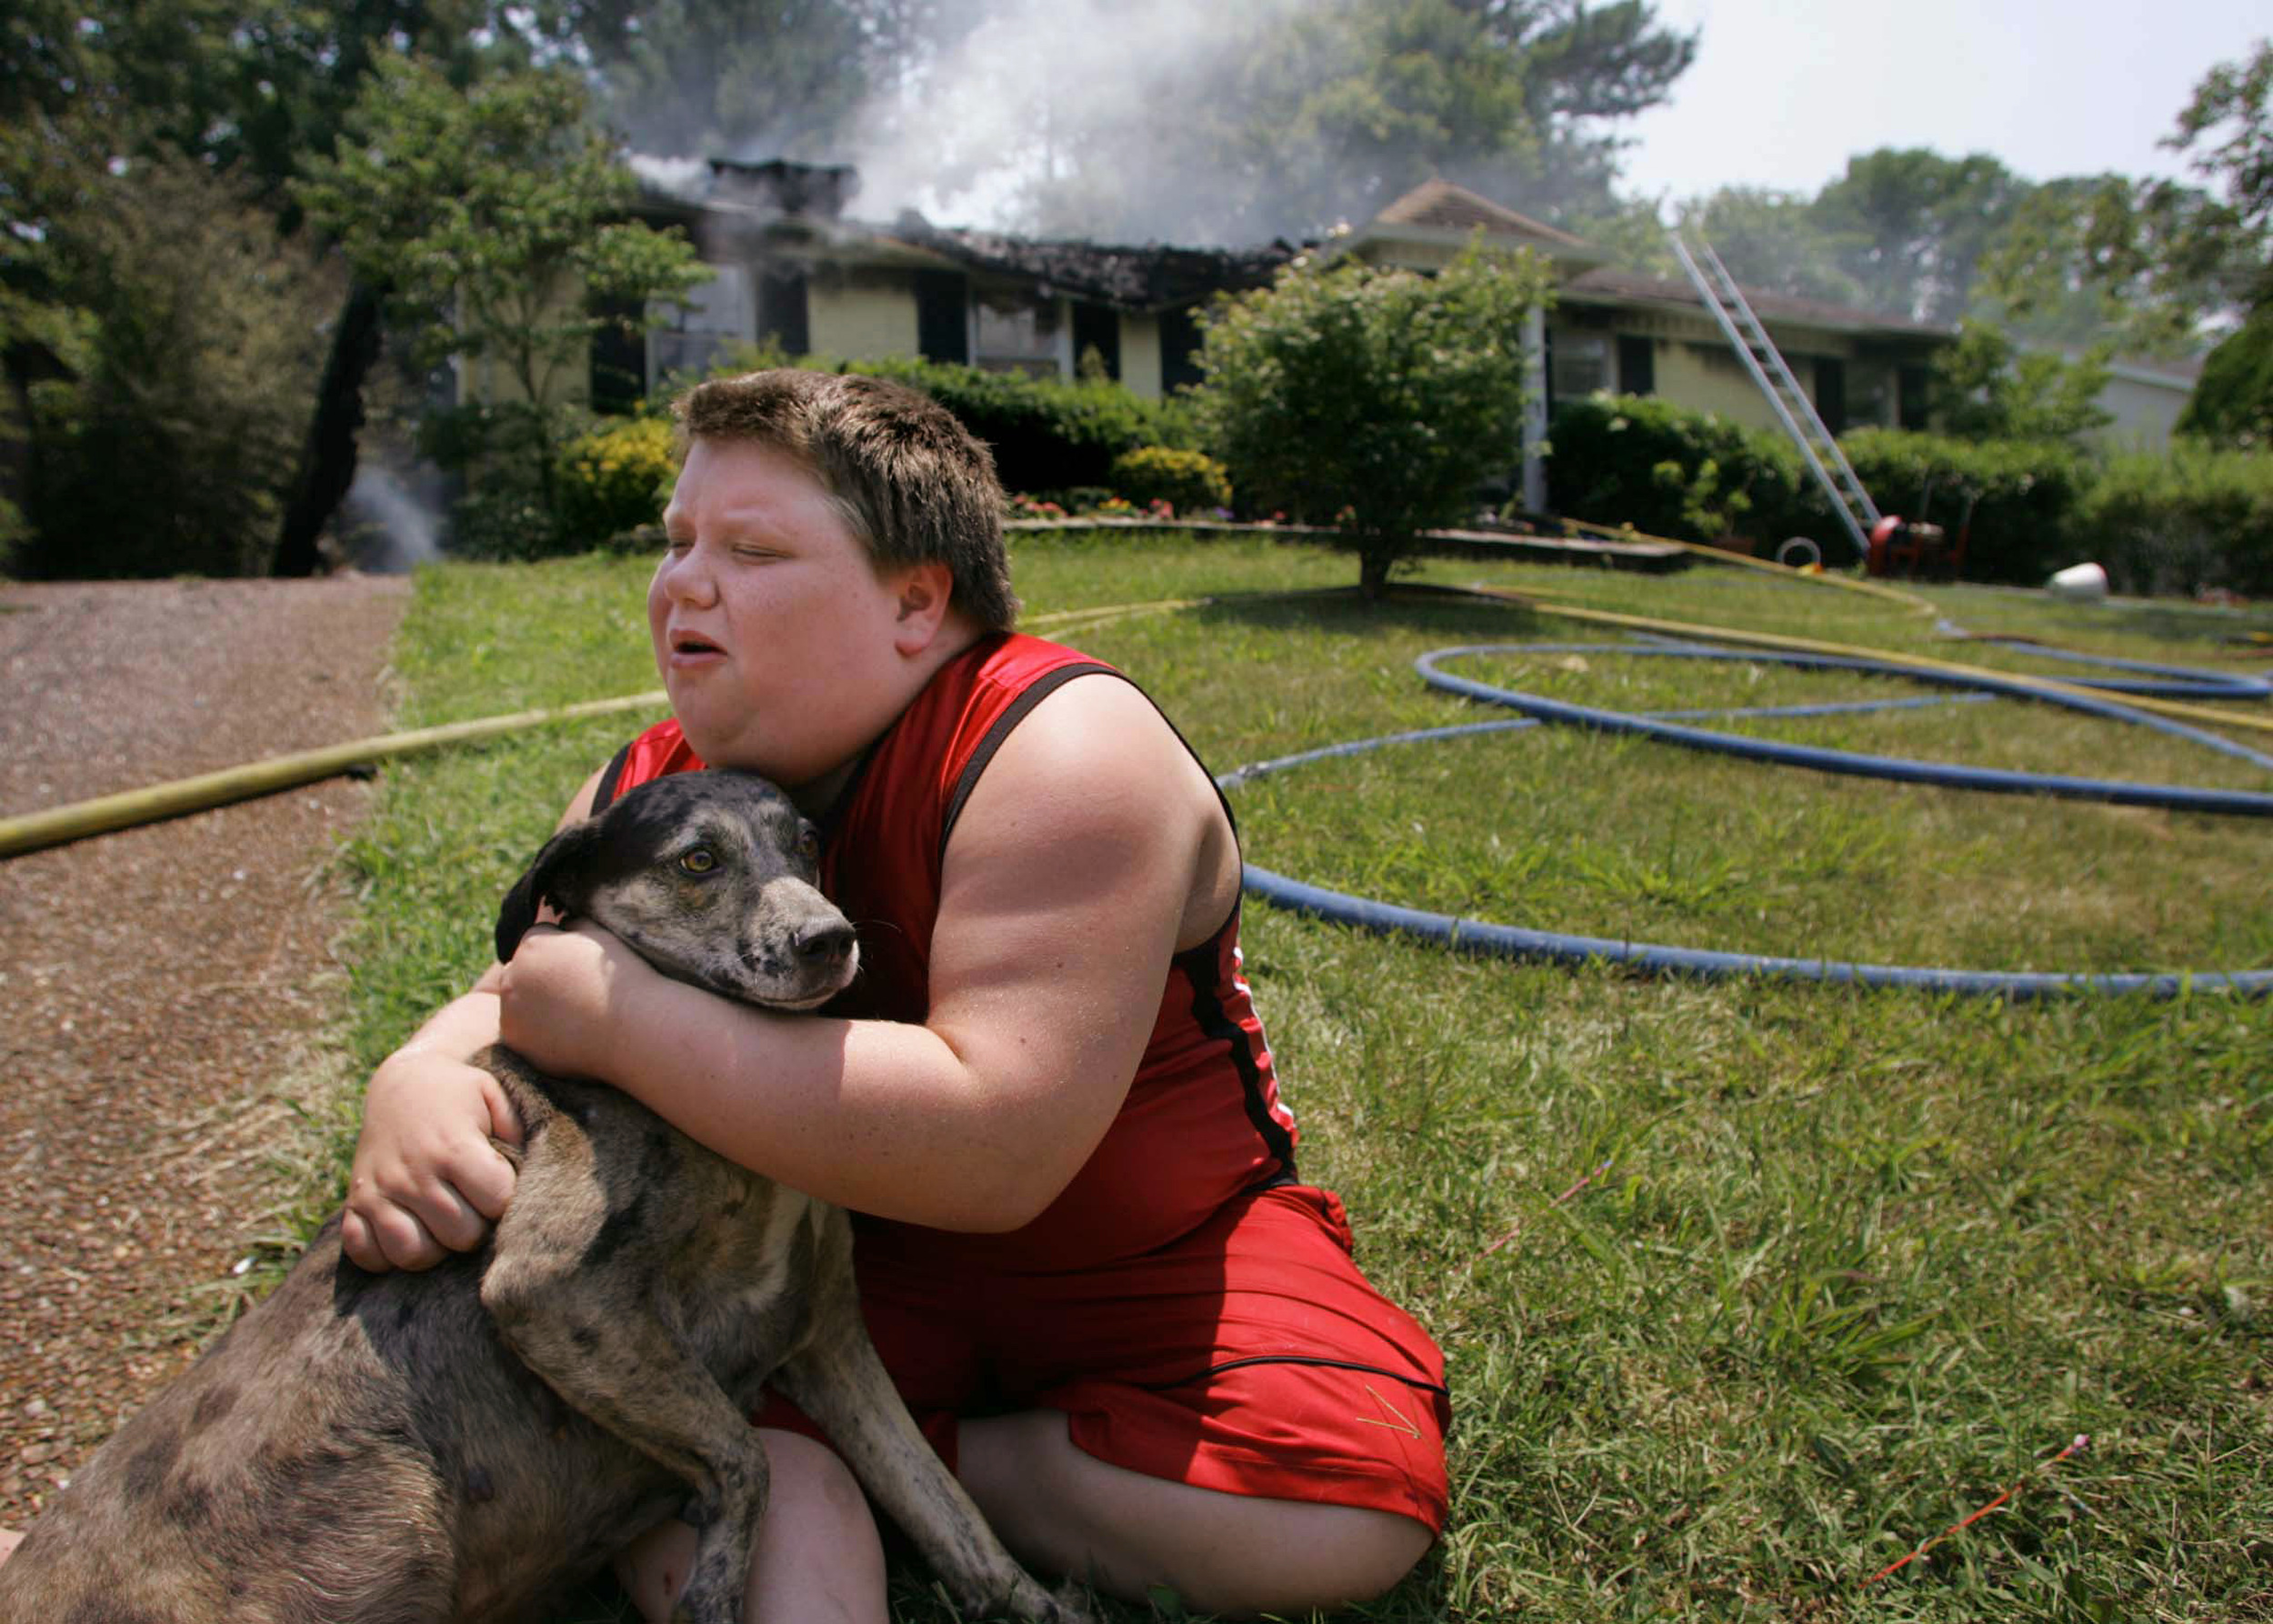  Joseph Cunningham , 11, hugs his dog “Vicious” outside his grandmother’s still-smoking house. He believed the dog had been trapped inside the fire but was found by a neighbor Friday, July 7, 2006 in Antioch, Tenn.  